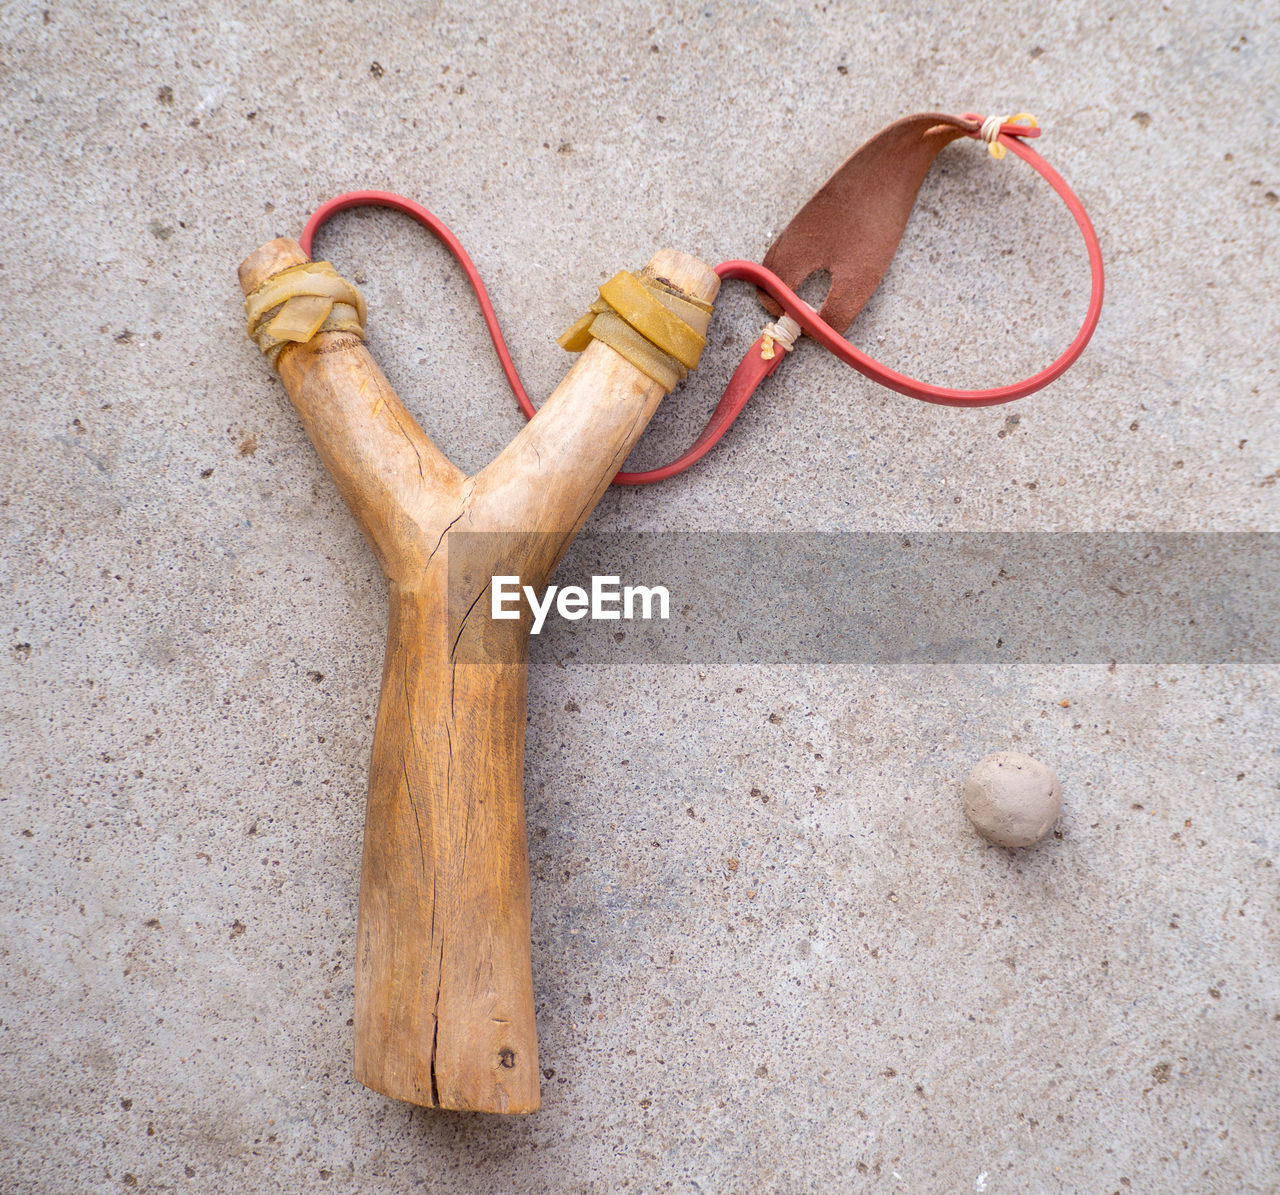 A catapult made of wood and a ball of clay.